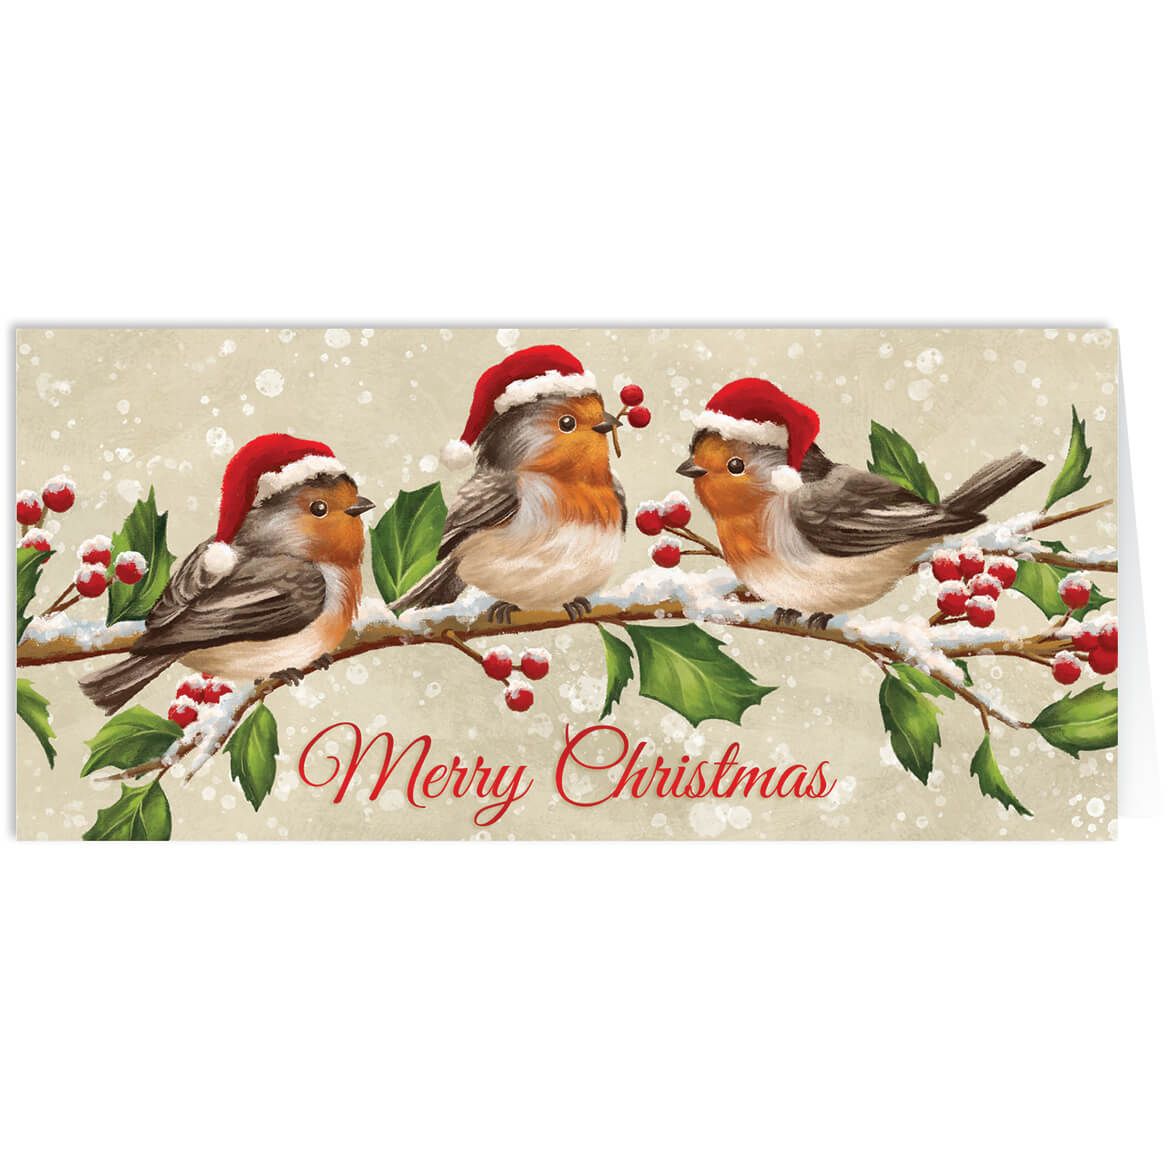 Personalized Birds with Hats Christmas Card Set of 20 + '-' + 368257